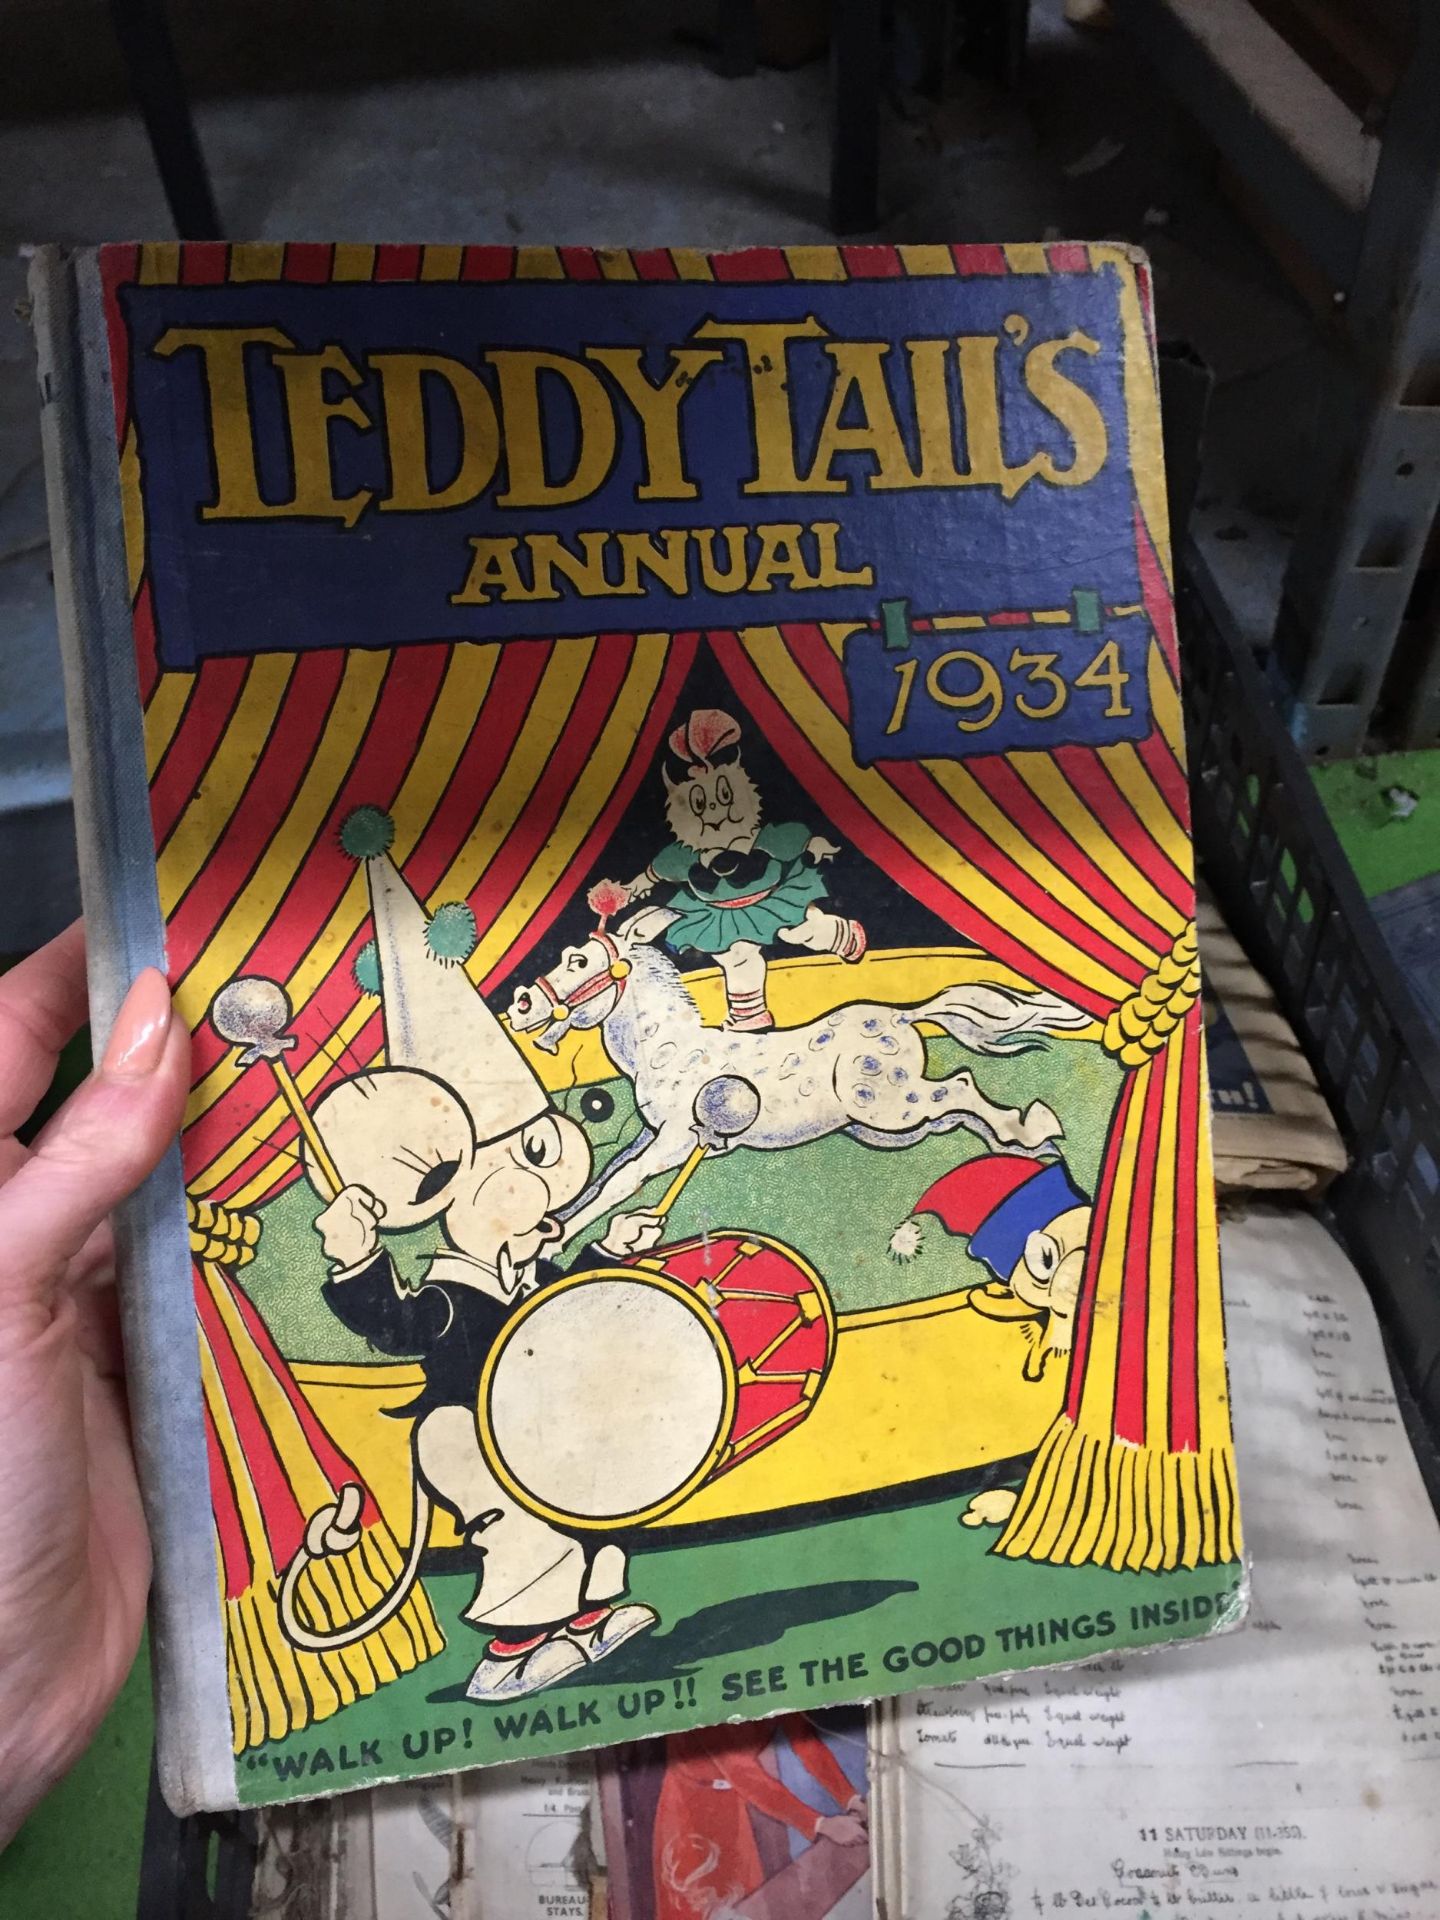 A BUNDLE OF THE MAGNET COMICS WITH BILLY BUNTER TOGETHER WITH A 1934 TEDDY TAILS ANNUAL - Bild 2 aus 3